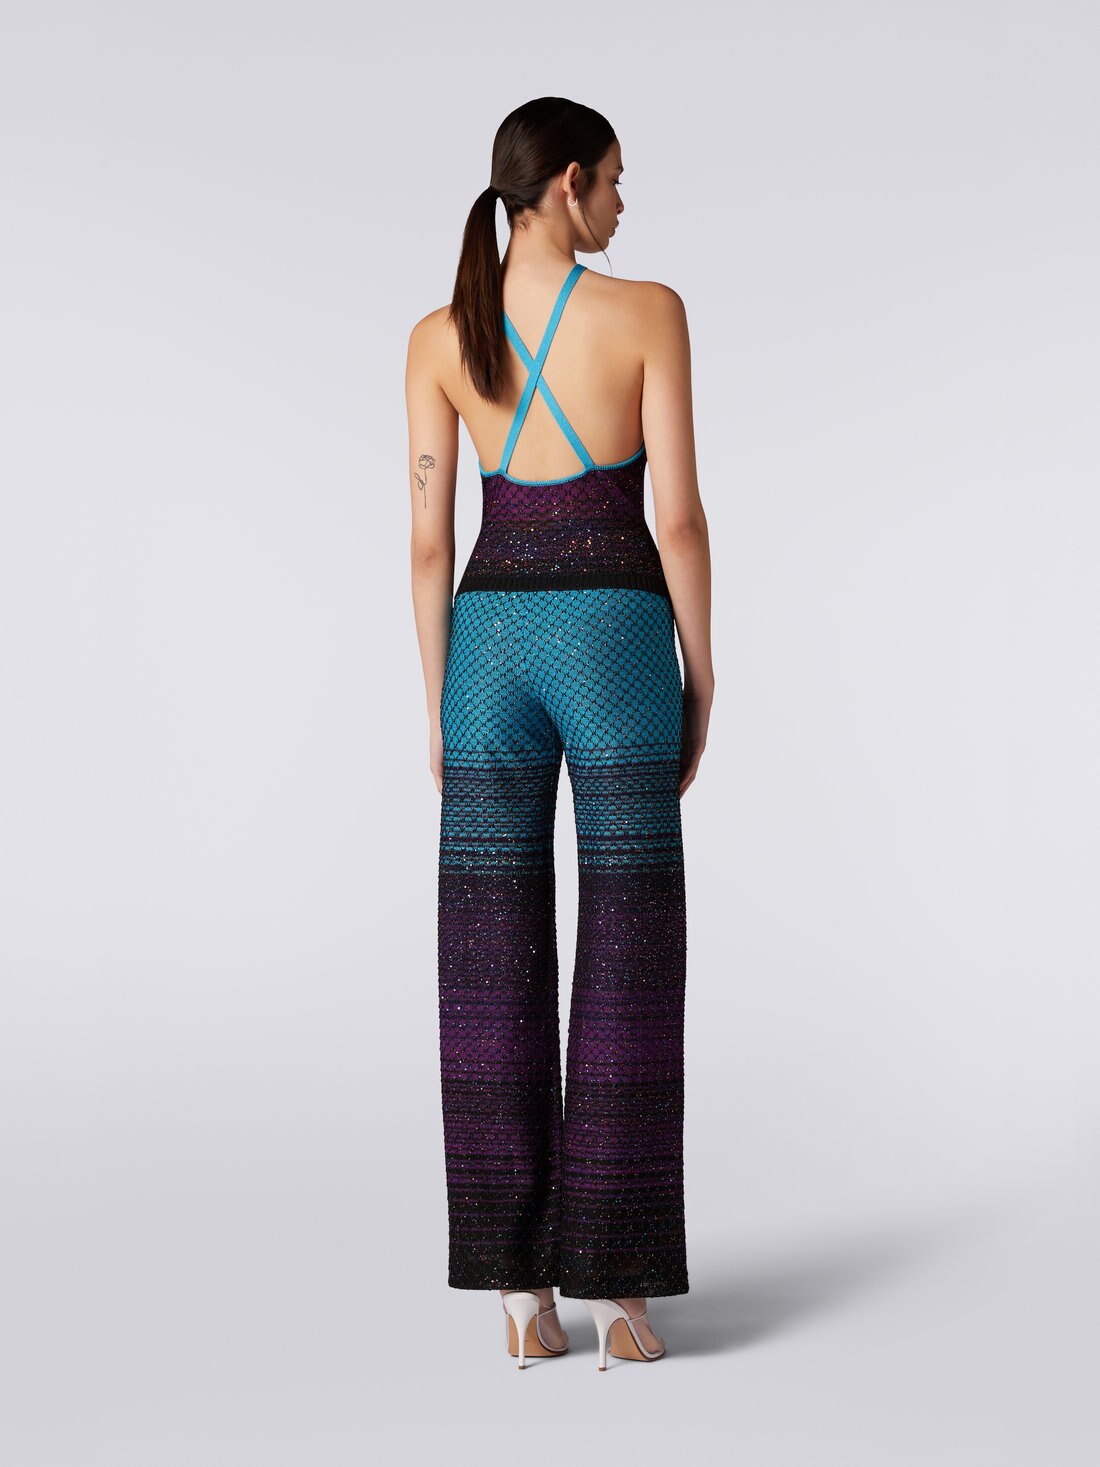 Flared knit trousers with sequins, Turquoise, Purple & Black - DS23SI0ZBK022ISM8NJ - 3